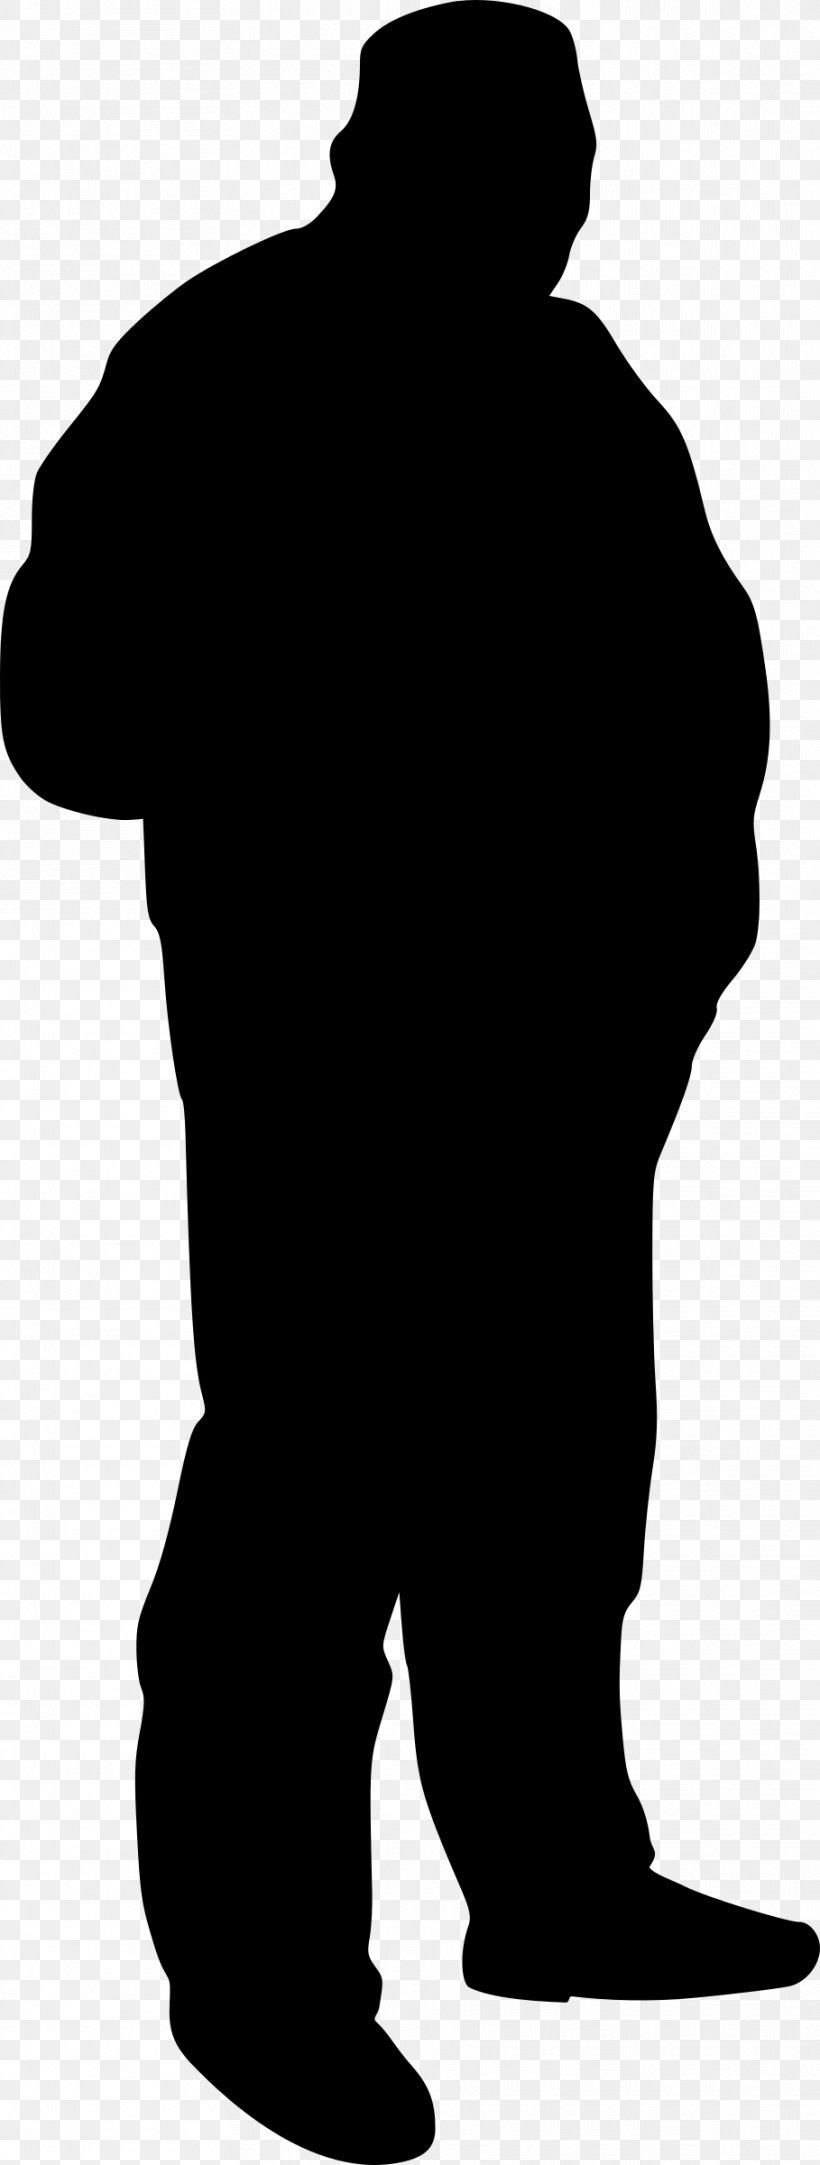 Silhouette Security Clip Art, PNG, 909x2400px, Silhouette, Black, Black And White, Cartoon, Fictional Character Download Free